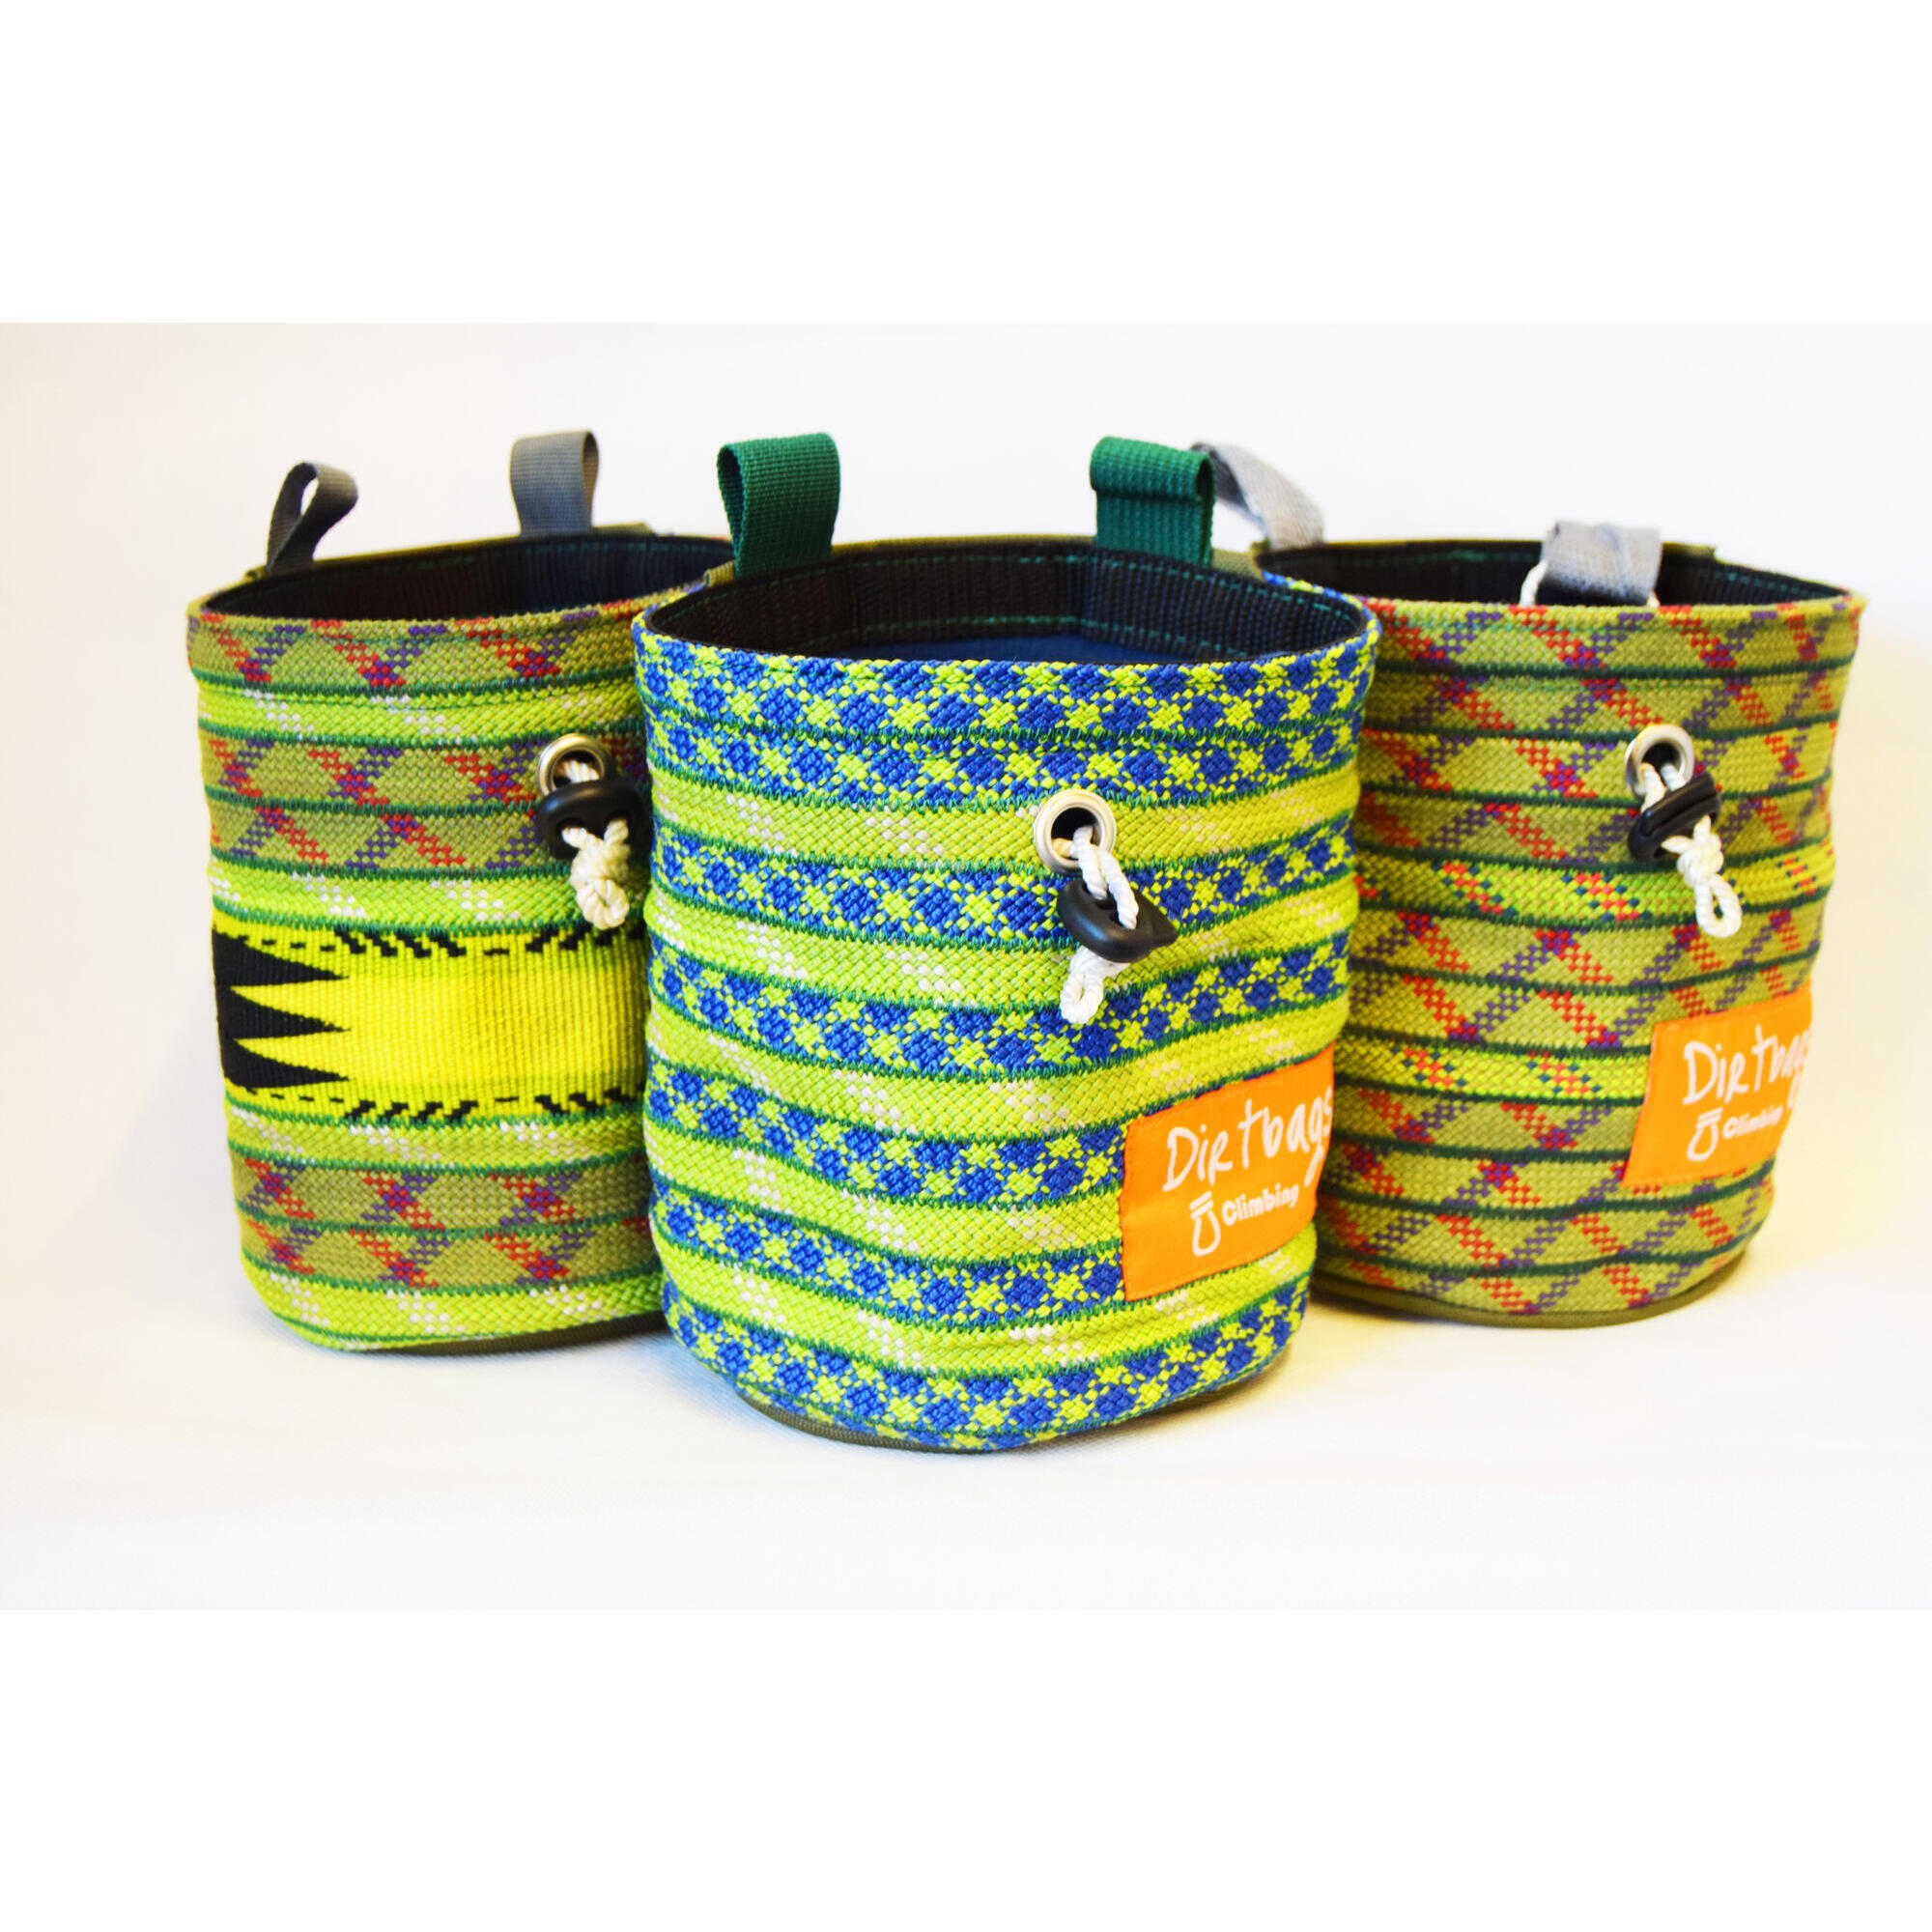 DIRTBAGS CLIMBING Recycled climbing rope chalk bag, made in the UK / Green